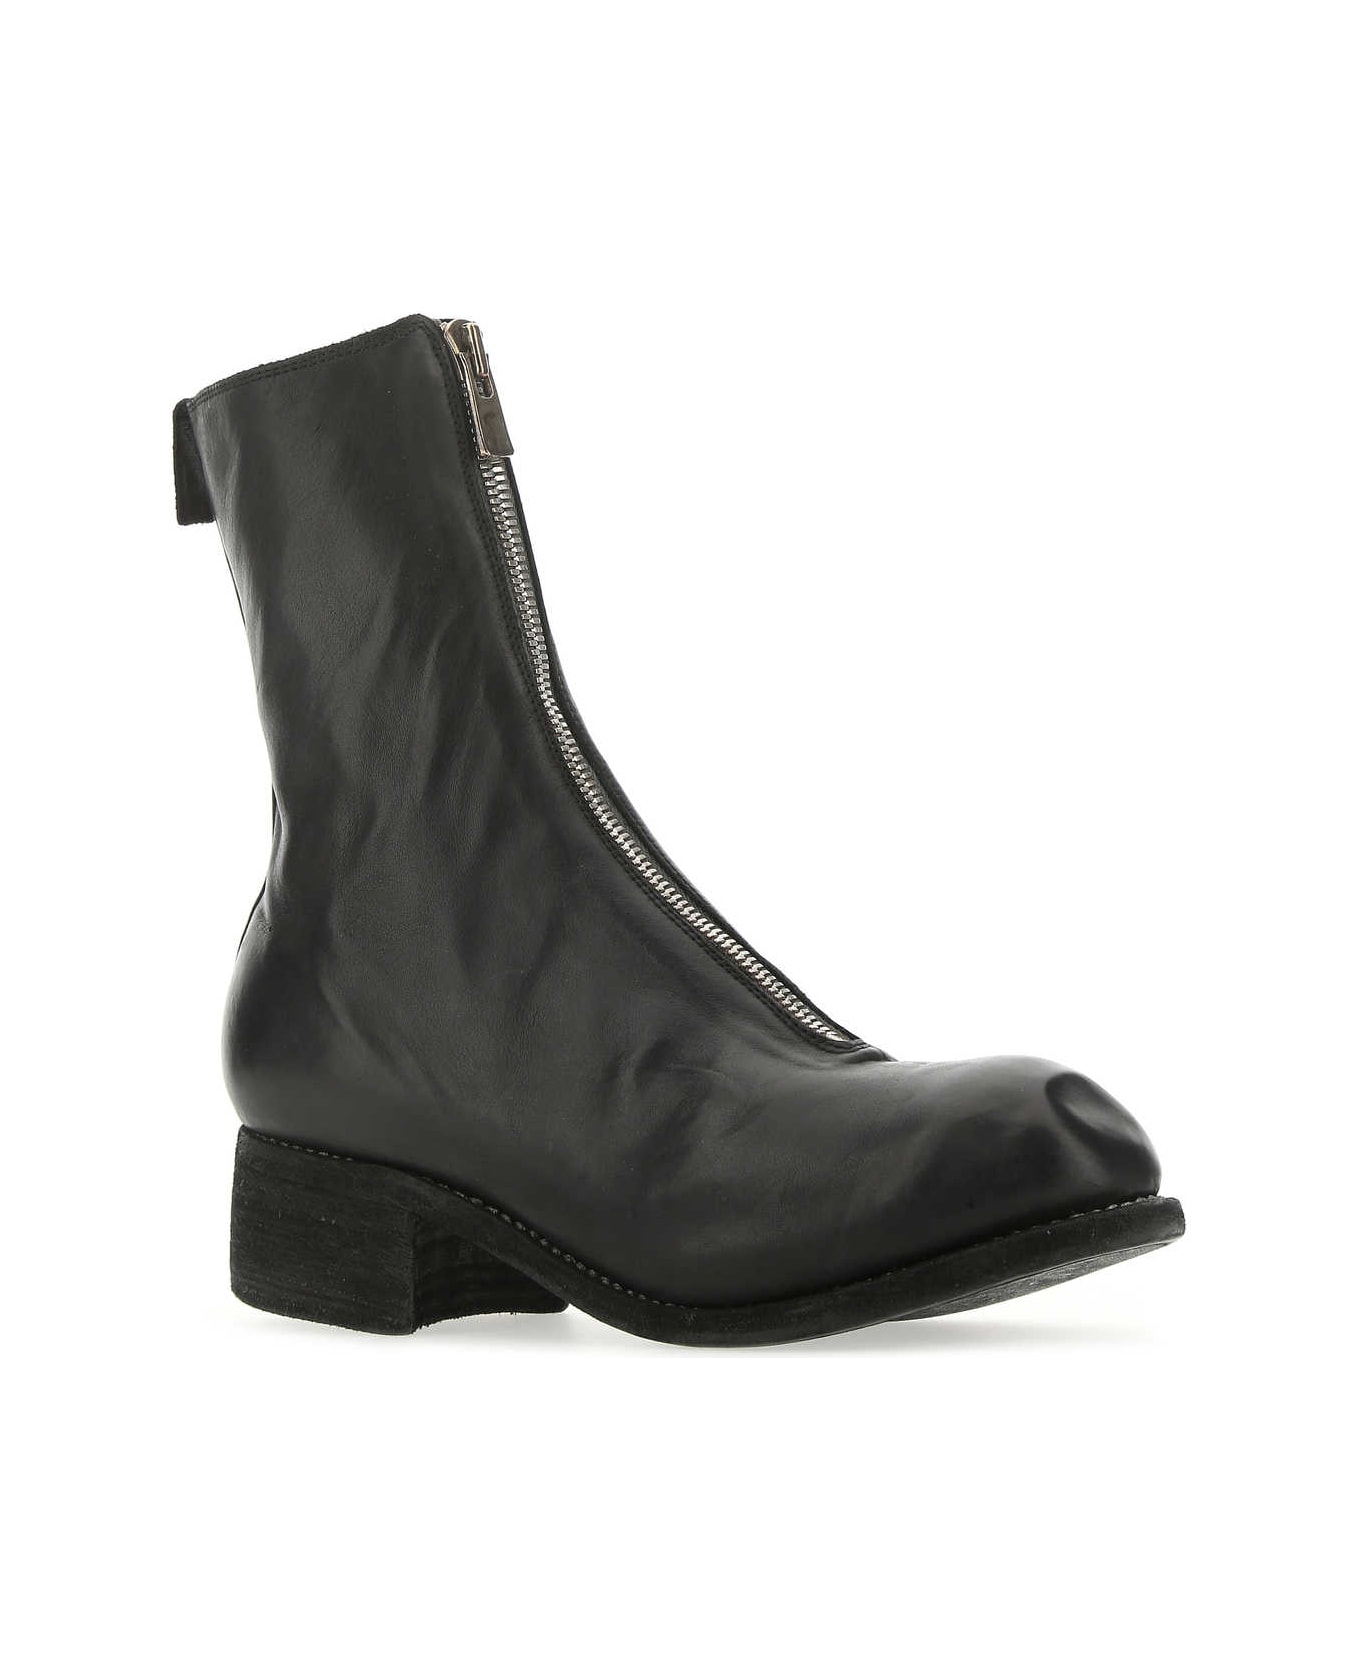 Guidi Black Leather Pl2 Boots - BLKT name:458